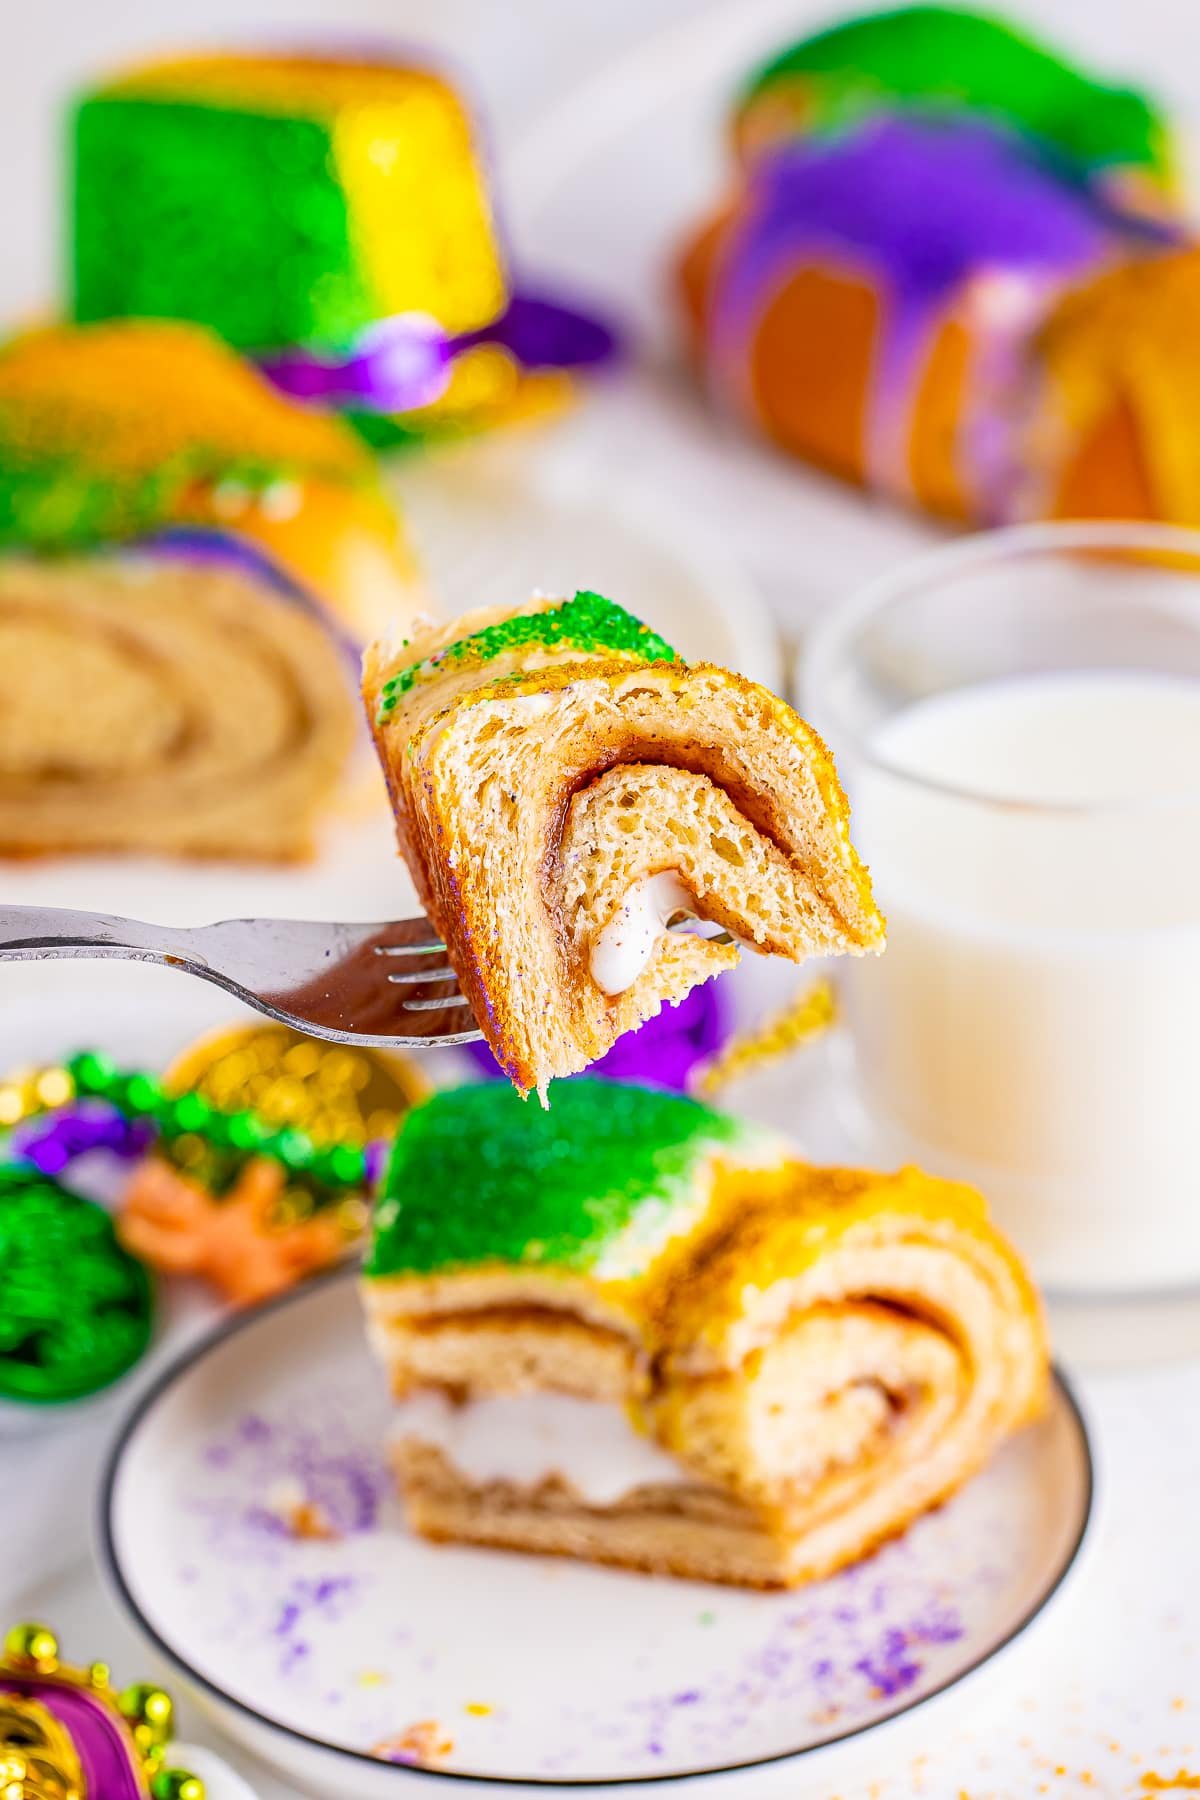 A bite of this King Cake Recipe on a fork suspended in air, you can see slices of the cake, a glass of milk, and mardi gras decorations in the background.